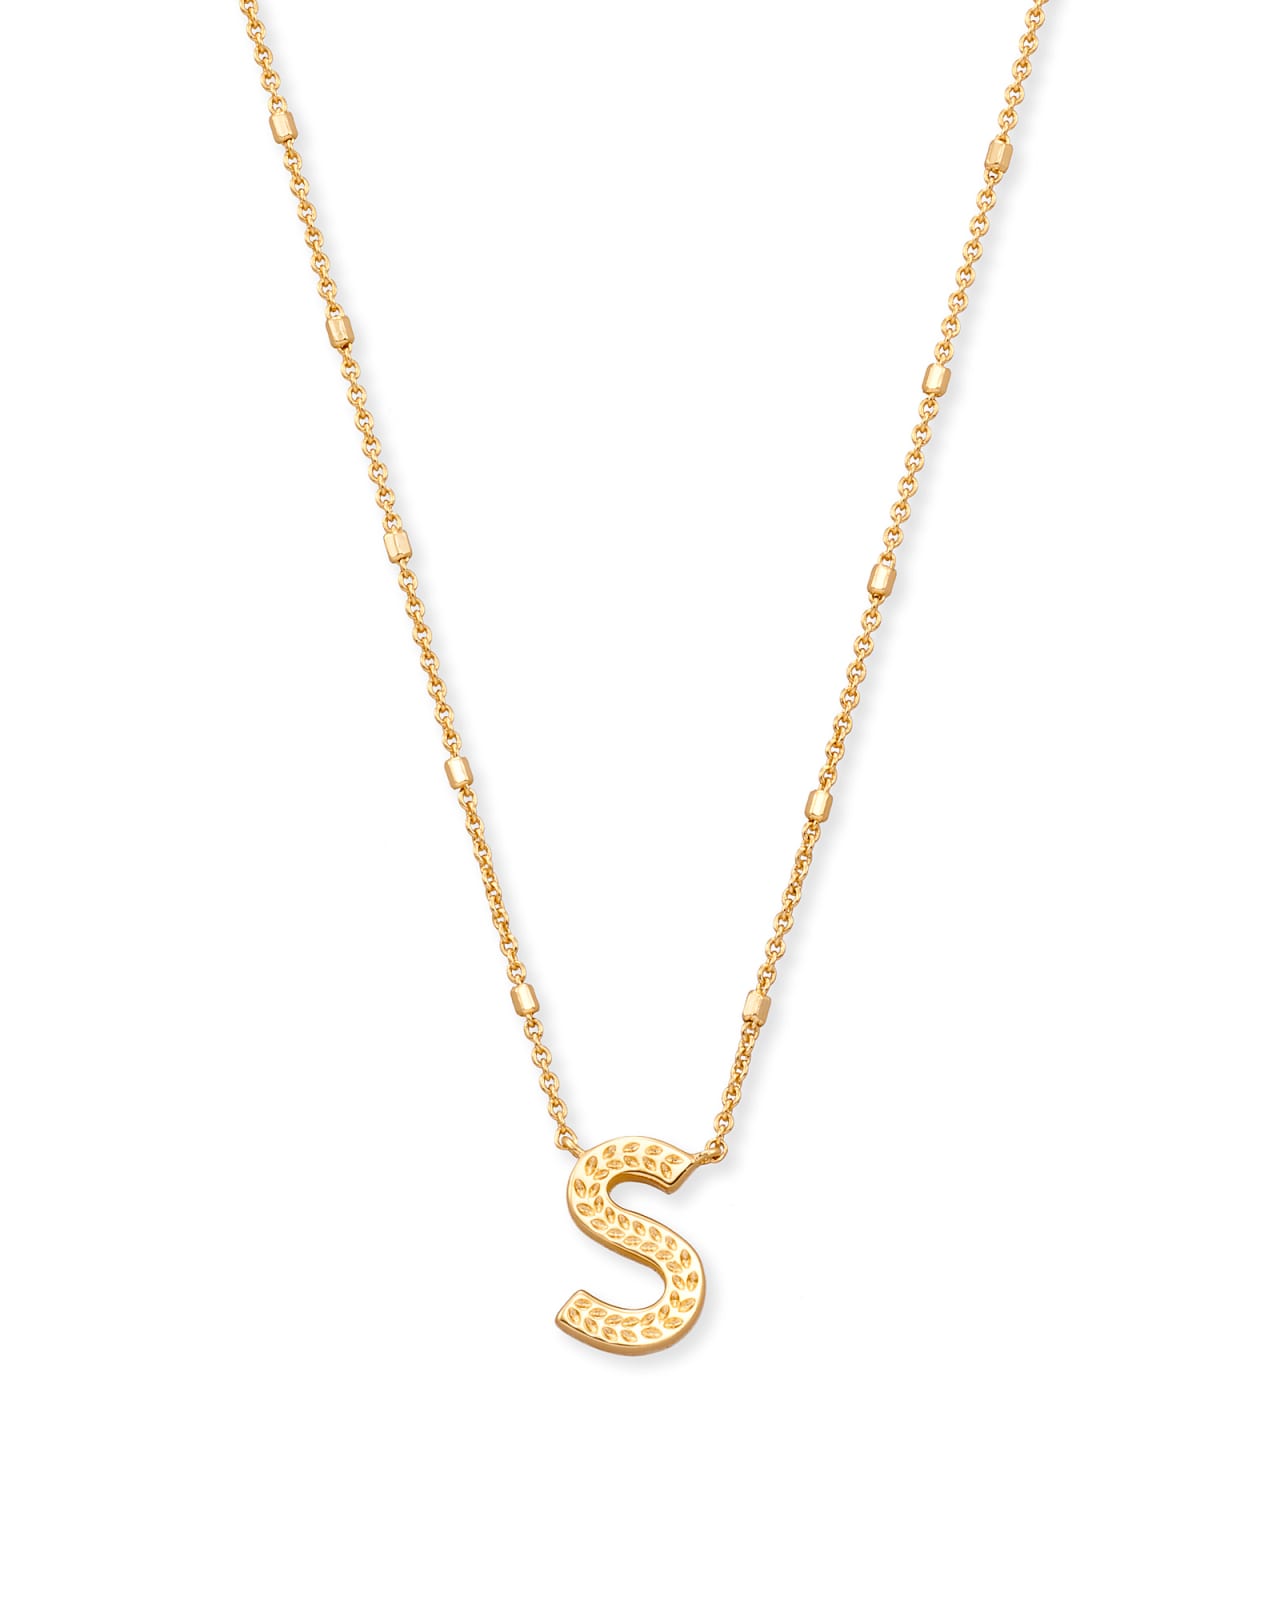 Letter S Pendant Necklace in Gold | Kendra Scott